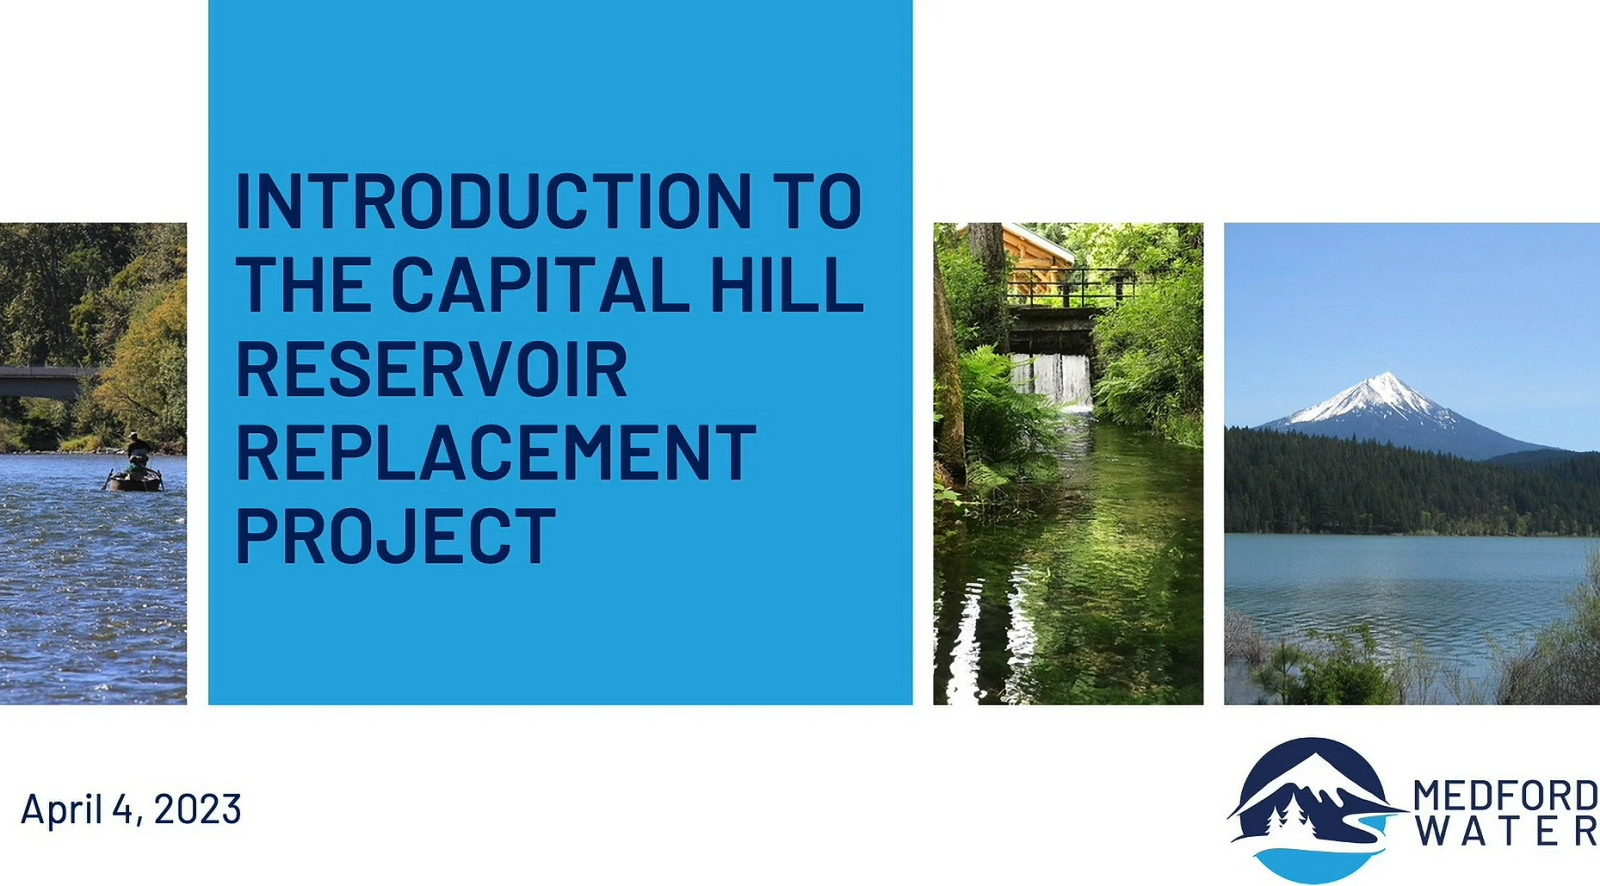 Introduction to the Capital Hill Project Video